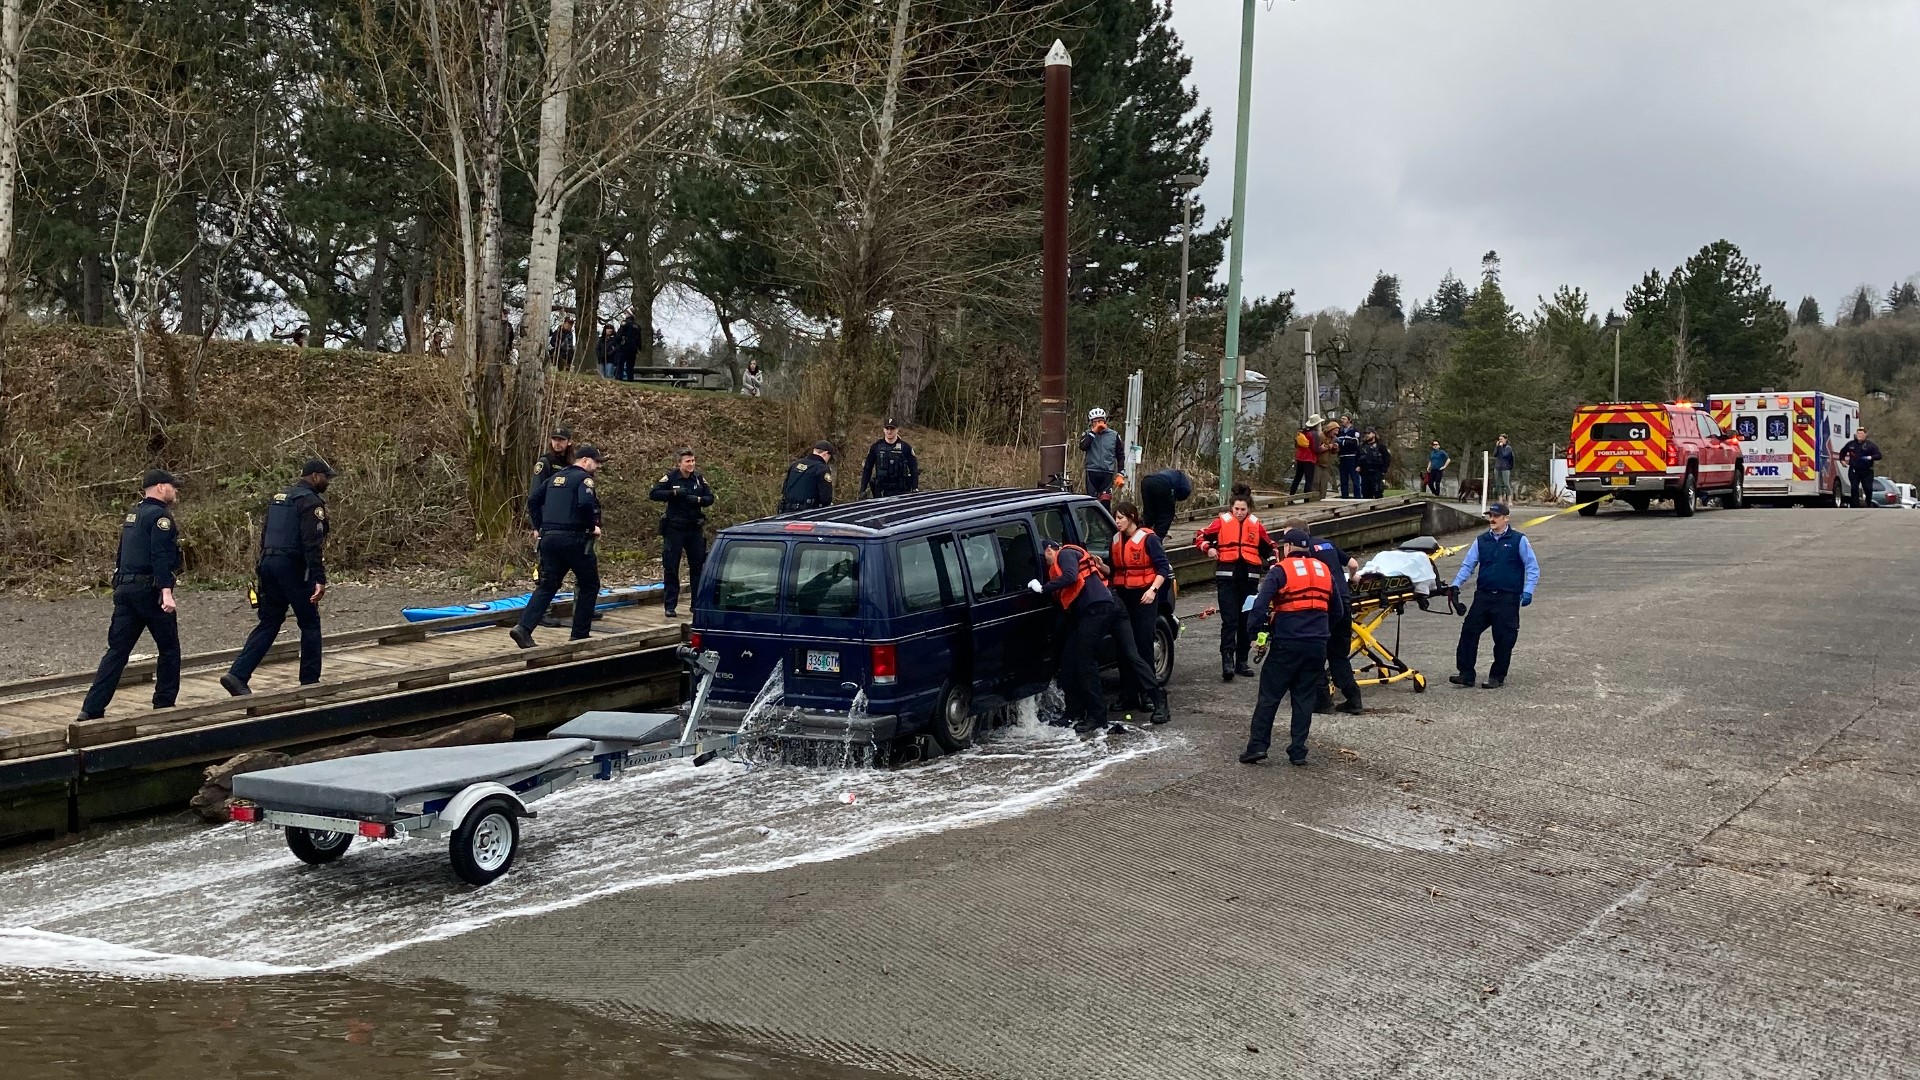 The woman was hospitalized in critical condition after being trapped in the van for about 20 minutes before fire crews were able to haul it out of the river.